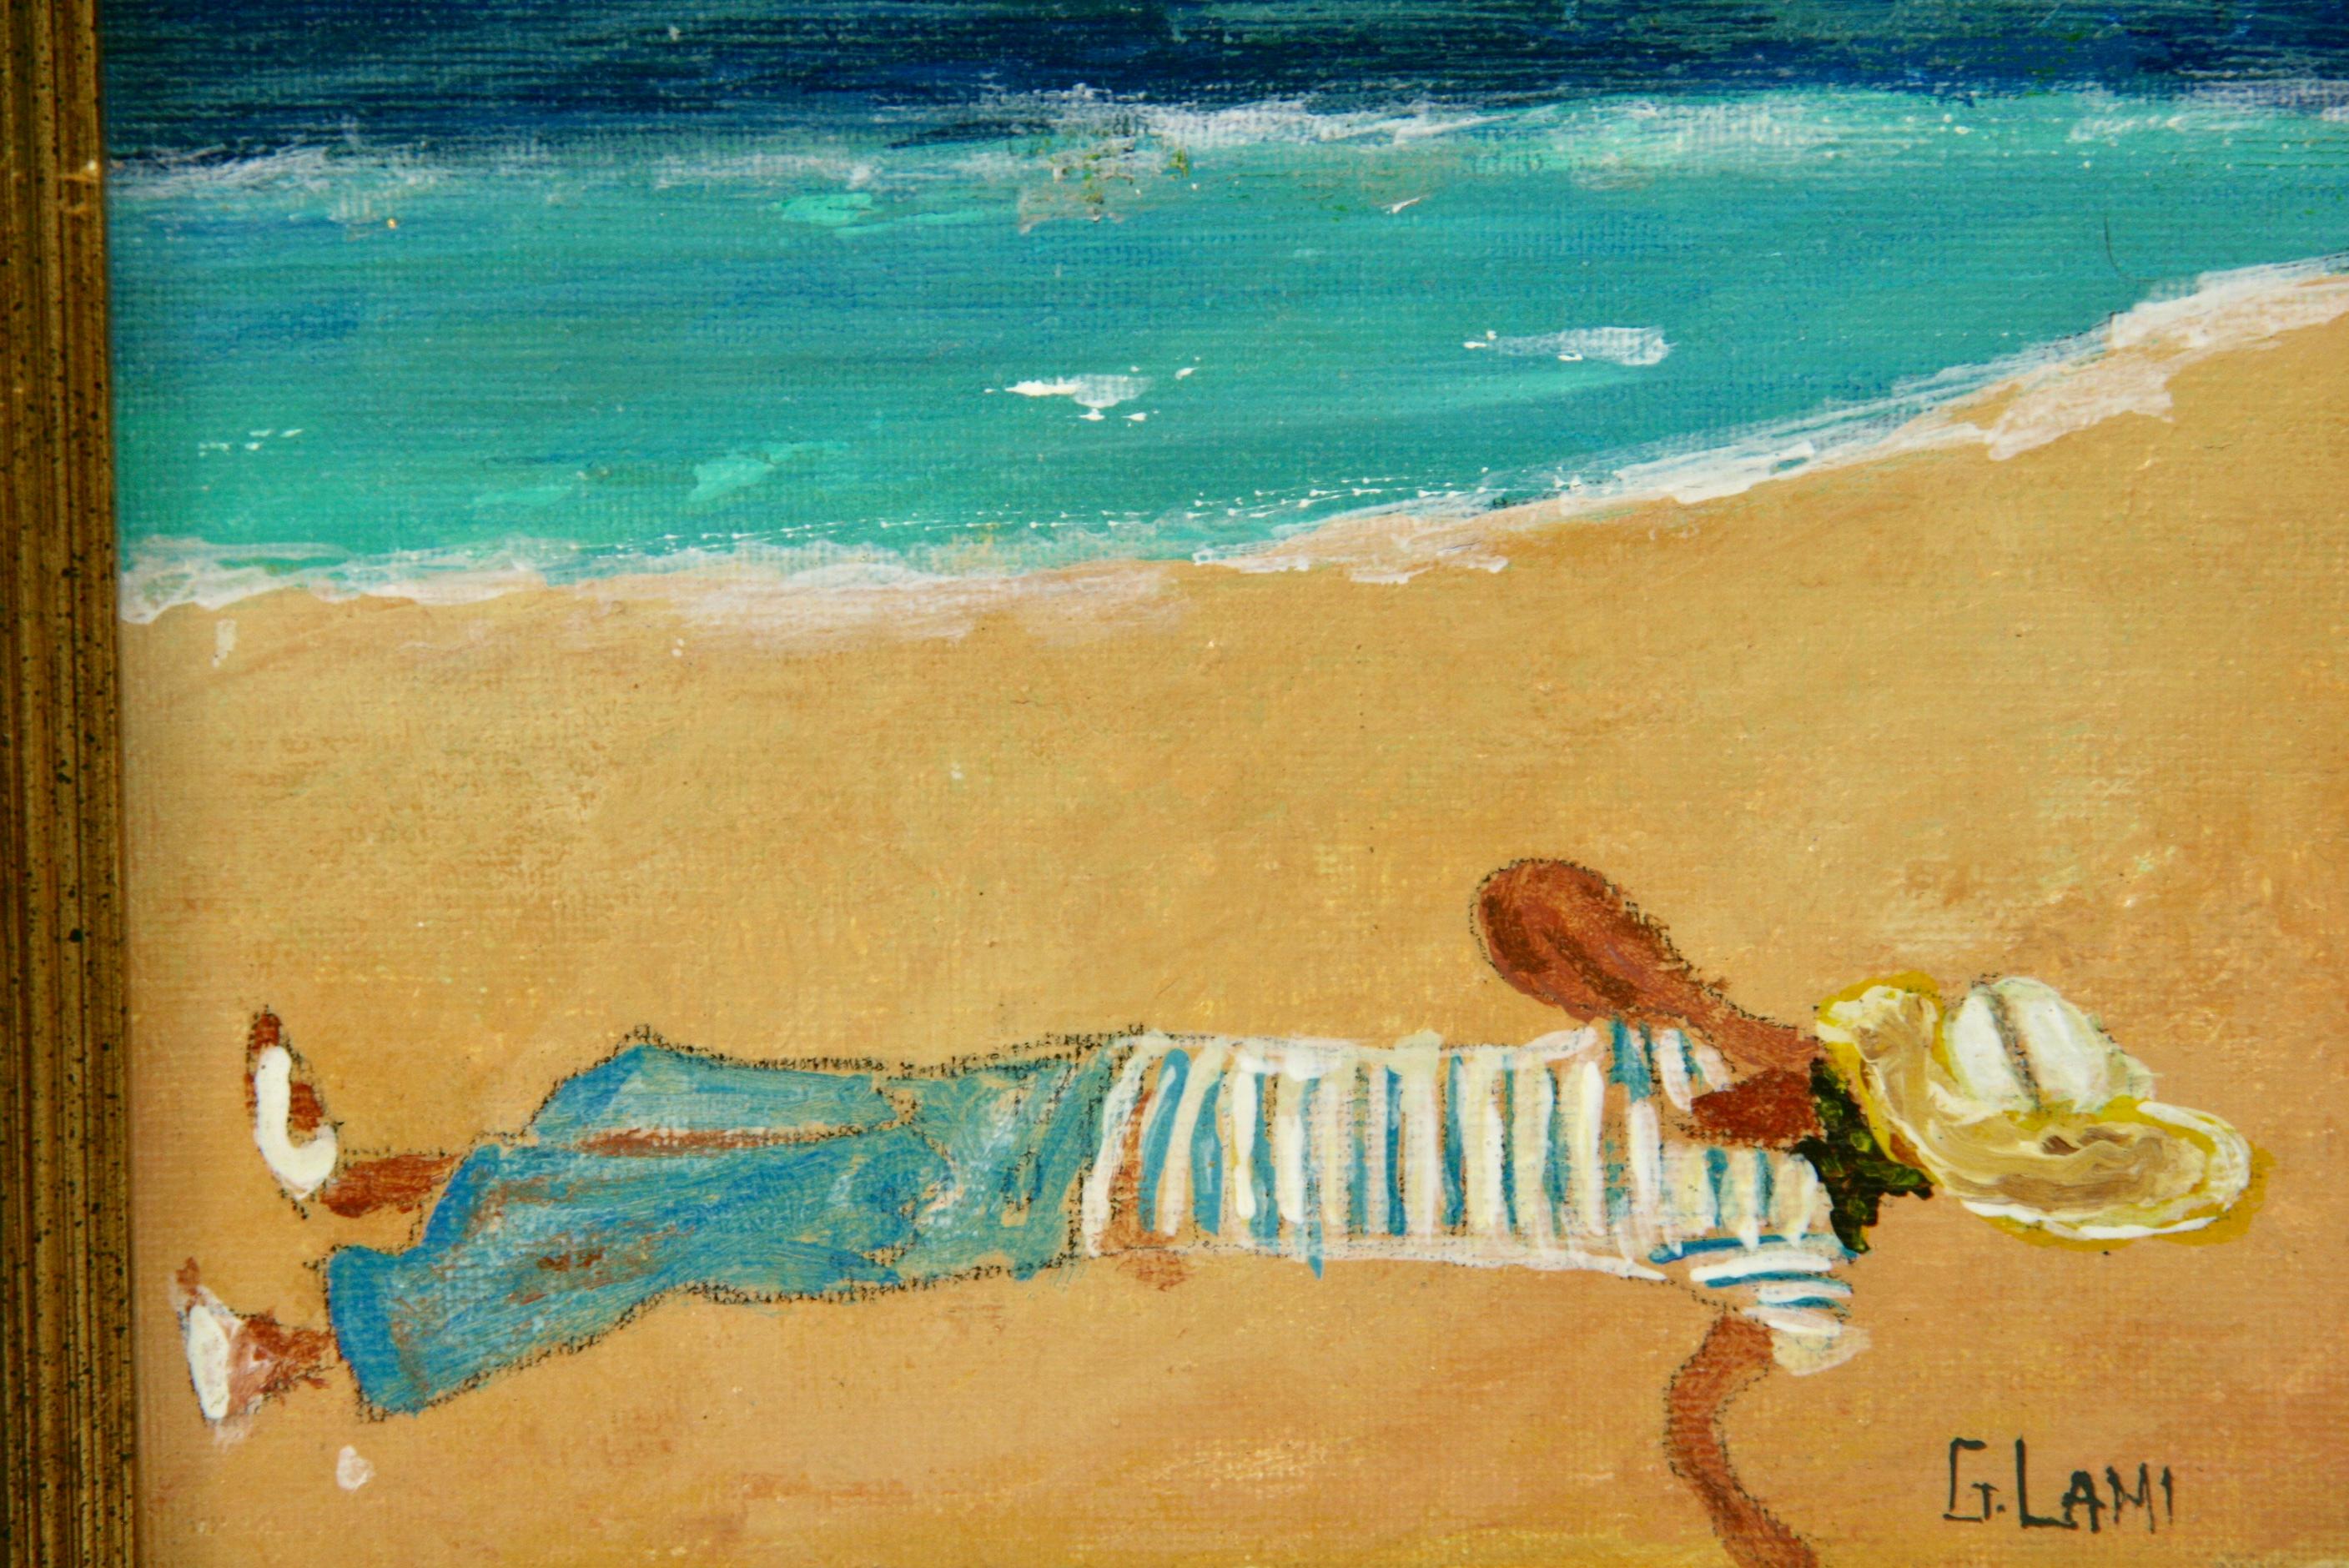  French Beach  Siesta Landscape/ Figuratve Painting - Black Abstract Painting by G.Lami